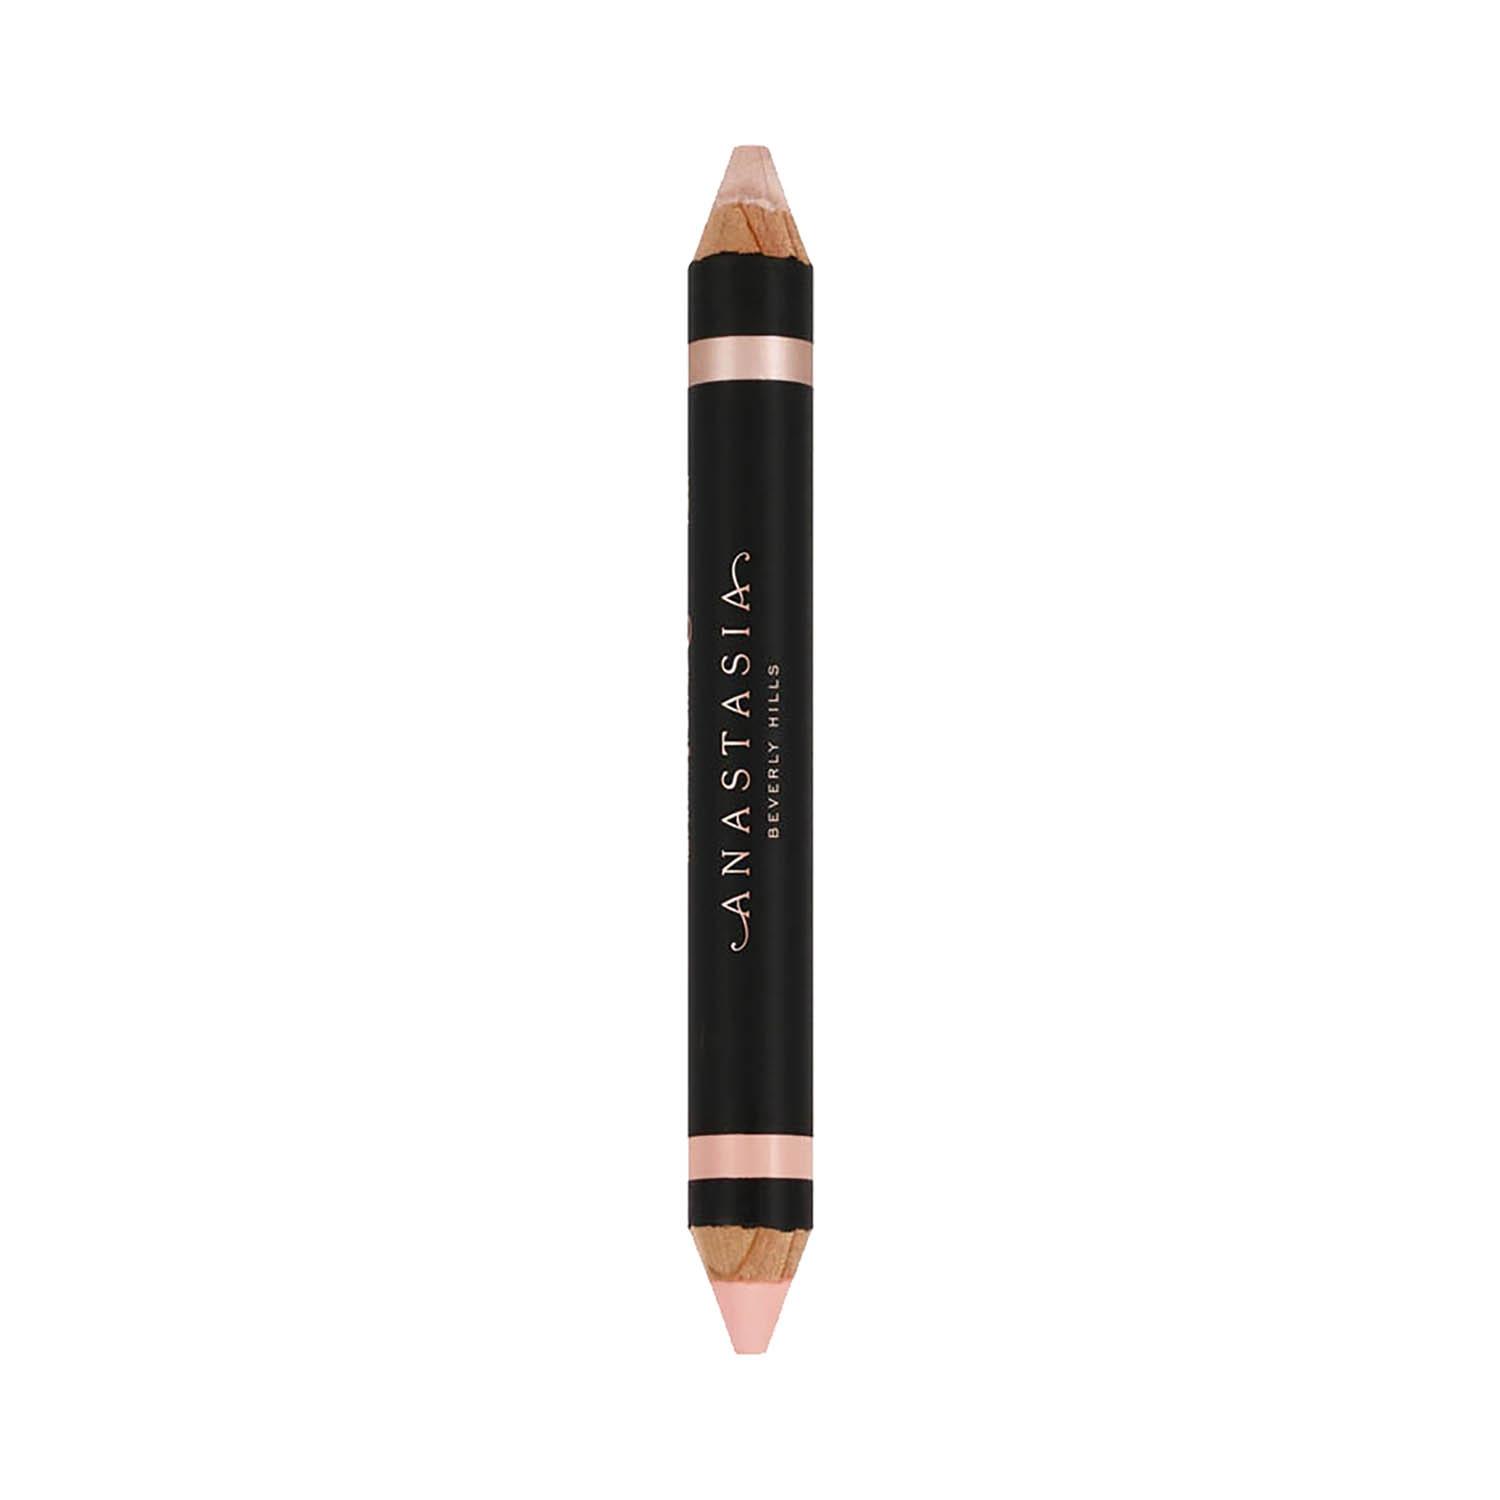 anastasia beverly hills highlighting duo pencil - matte camille/sand shimmer (4.8g)